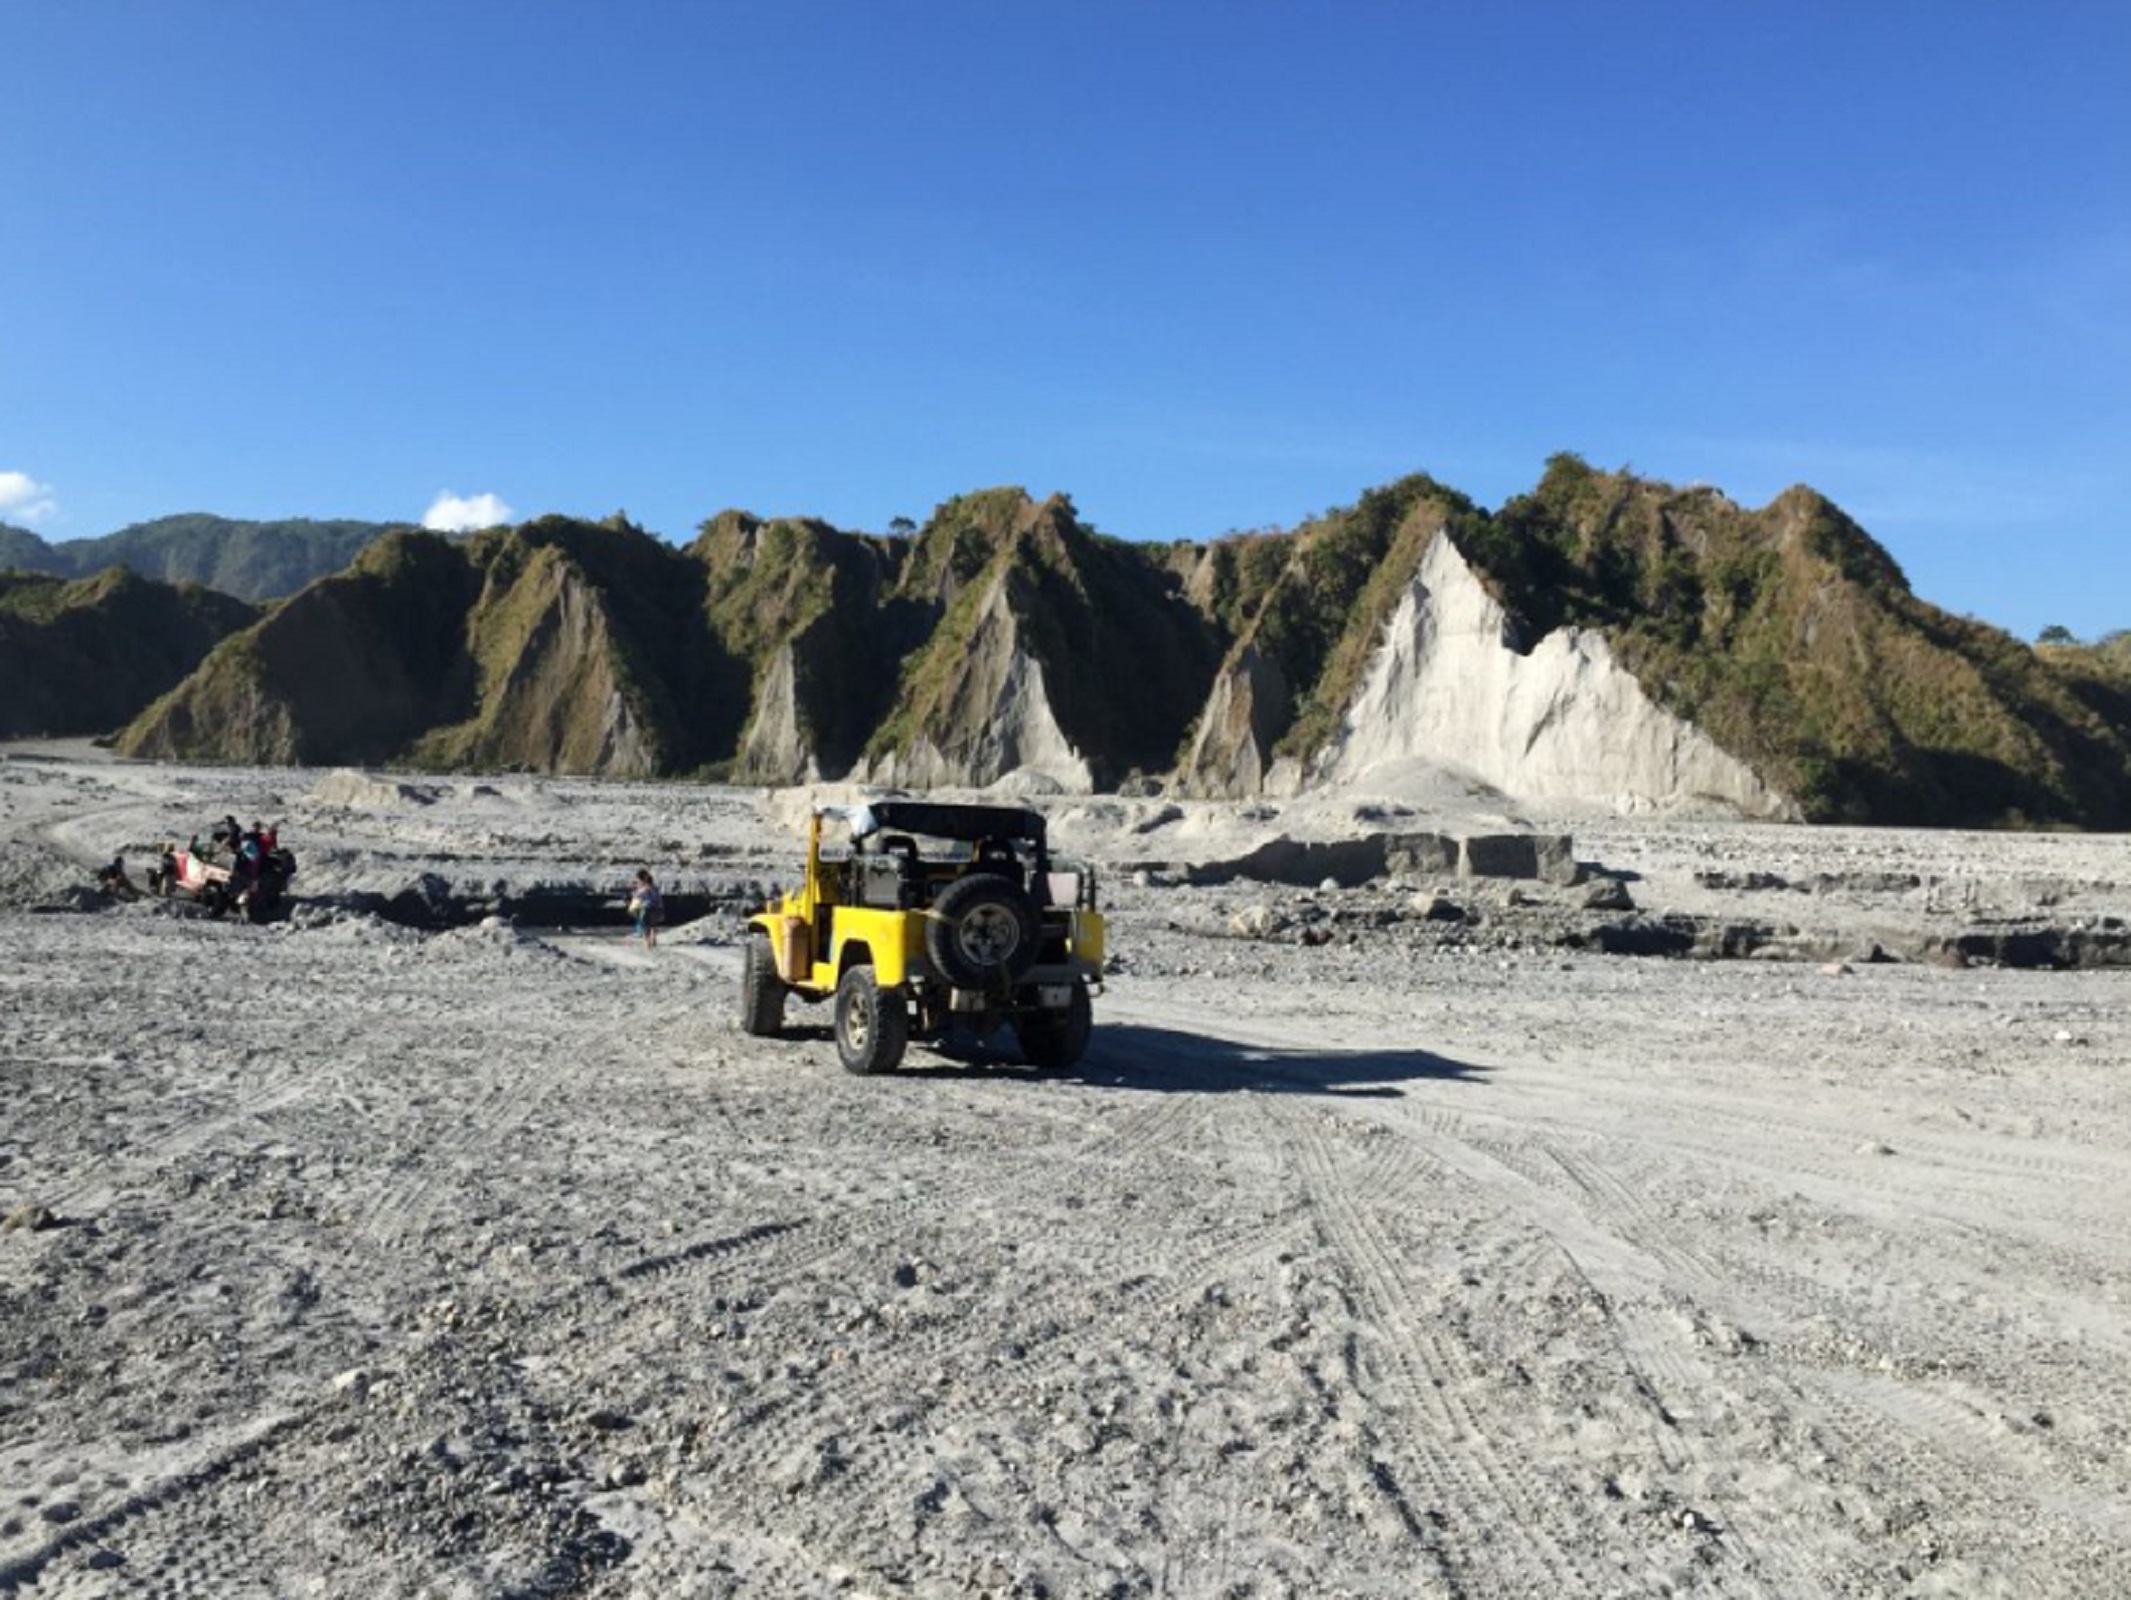 Guided Full Day Hike To Mt Pinatubo Crater Lake With 4x4 0654